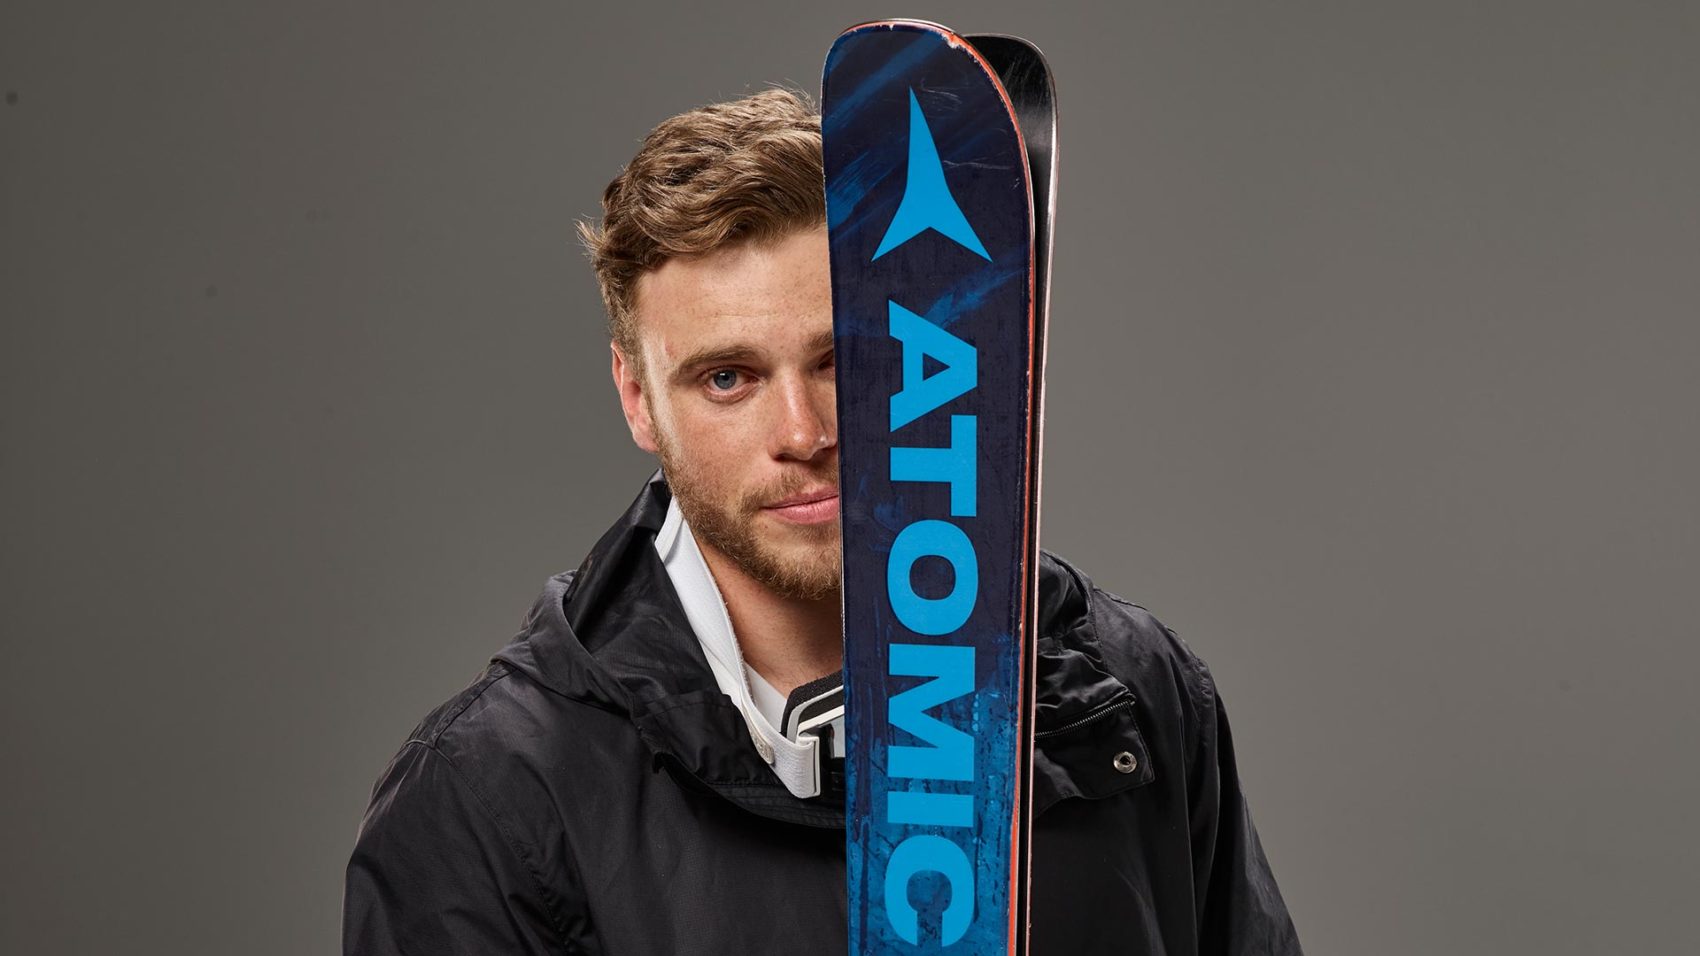 Gus Kenworthy is considering switching to Team GB.